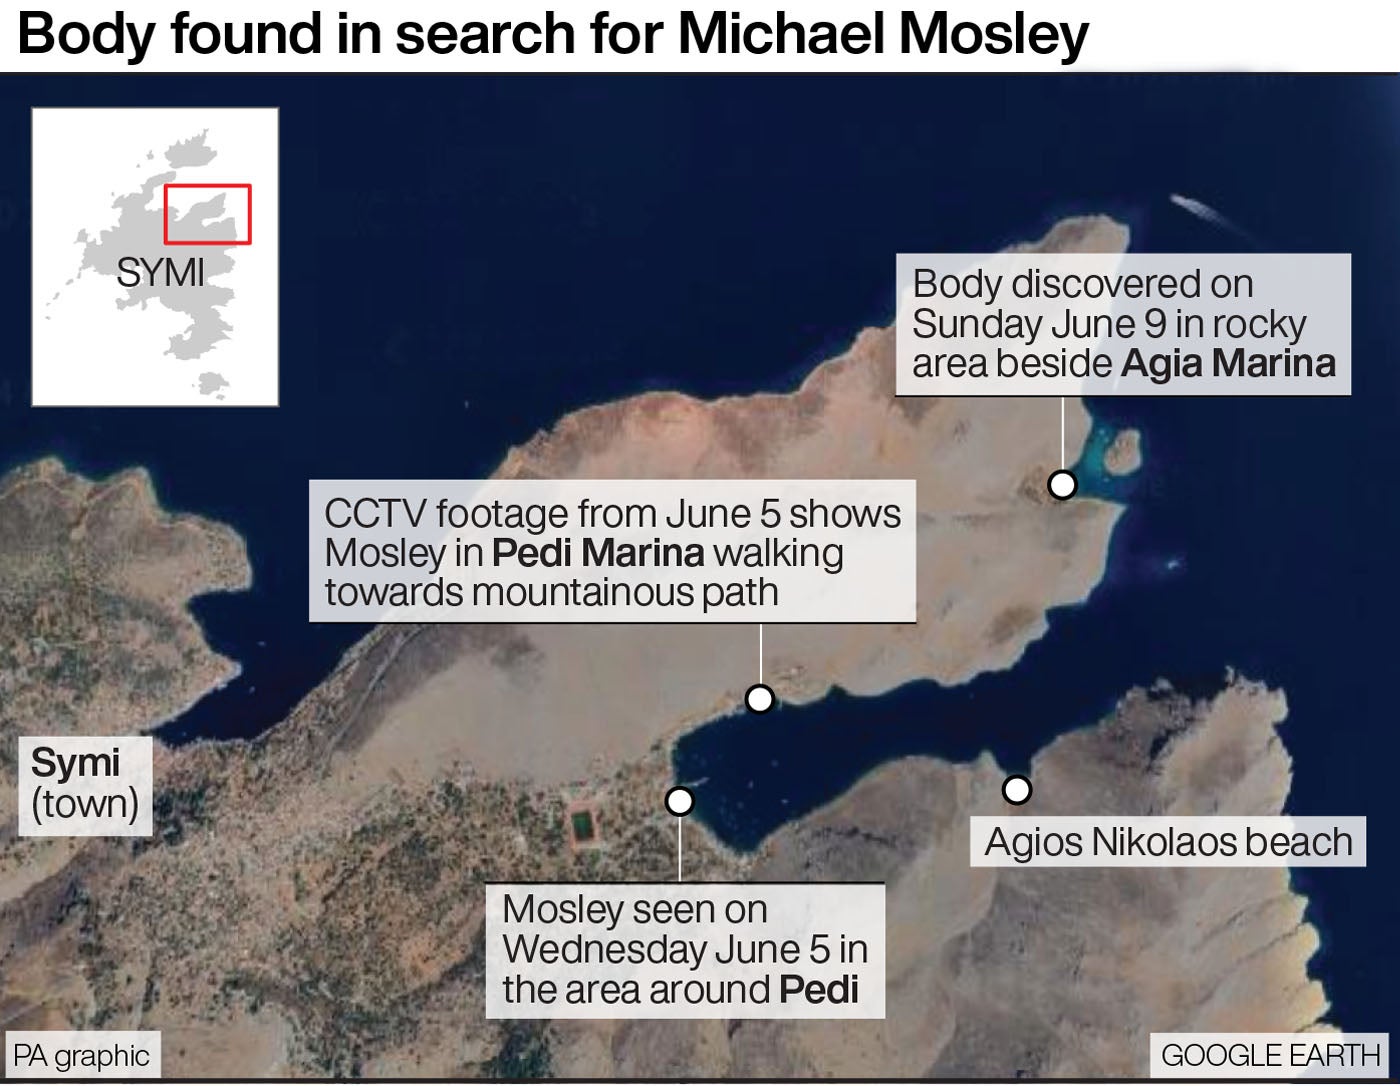 His body was discovered in a rocky area behind Agia Marina